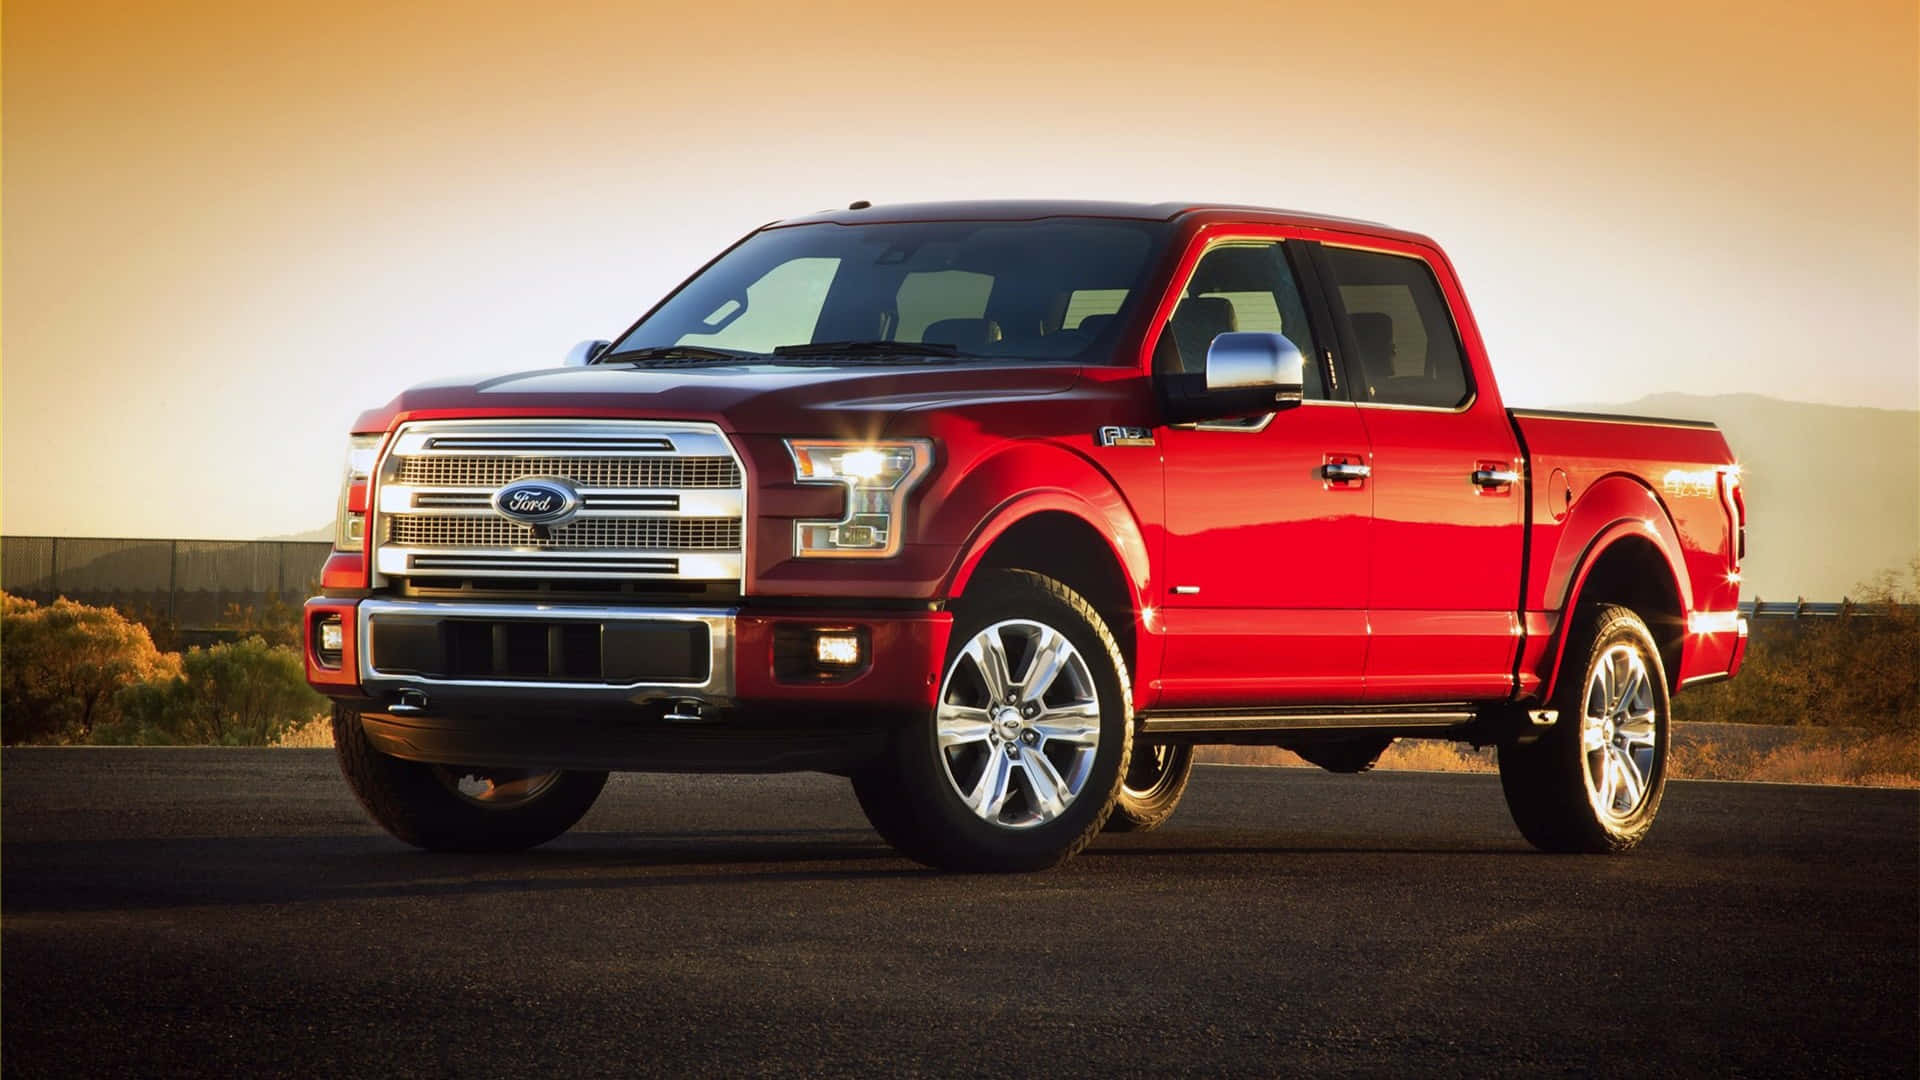 The Red Ford F - 150 Is Parked On A Desert Road Background